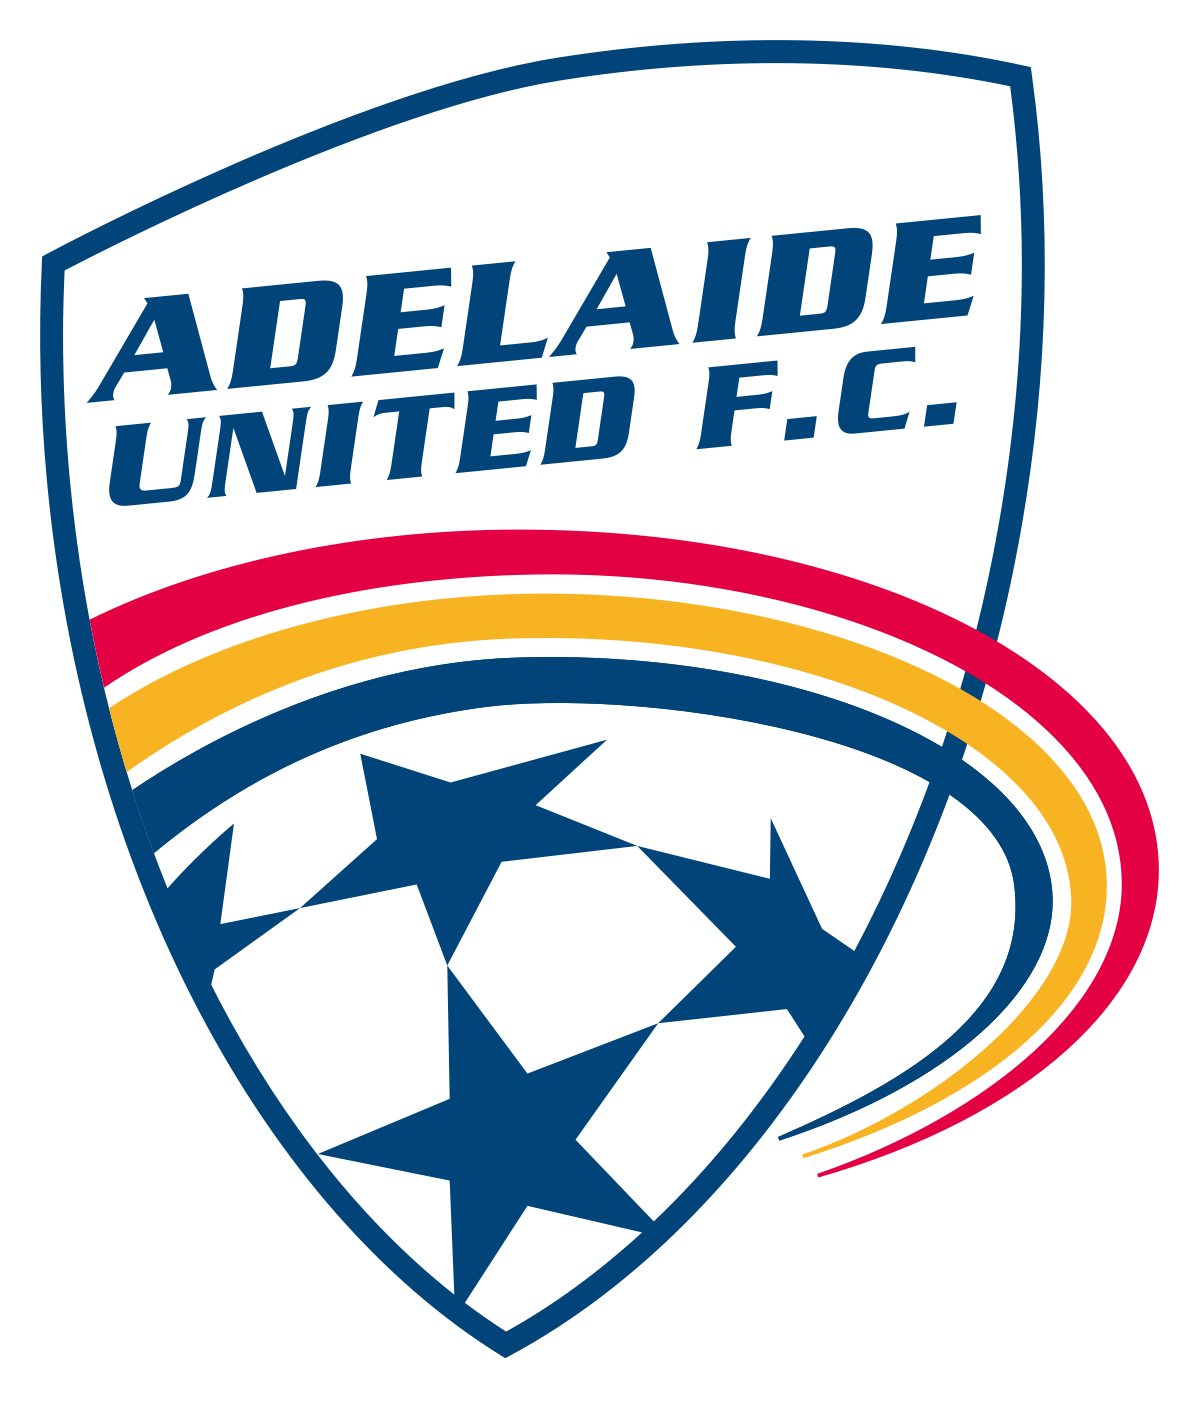 Adelaide United Fc Png Hdpng.com 1200 - Adelaide United Fc, Transparent background PNG HD thumbnail